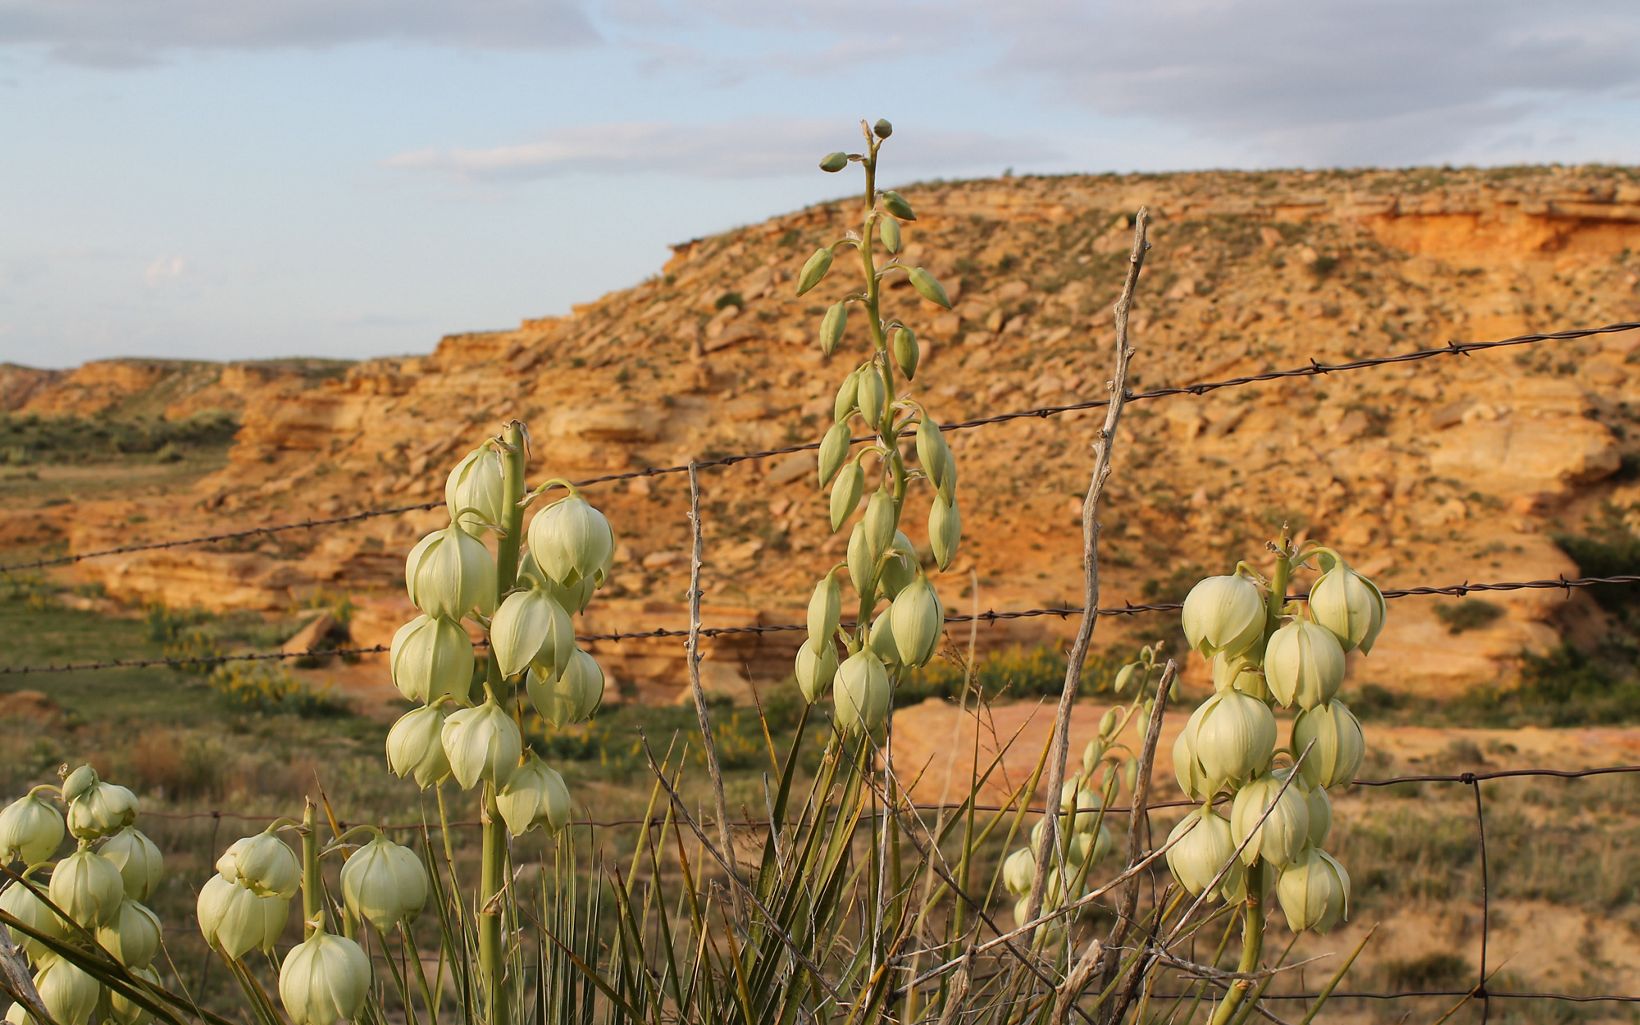 Green yucca blossoms in front of a barbed wire fence with chalk bluffs in background.